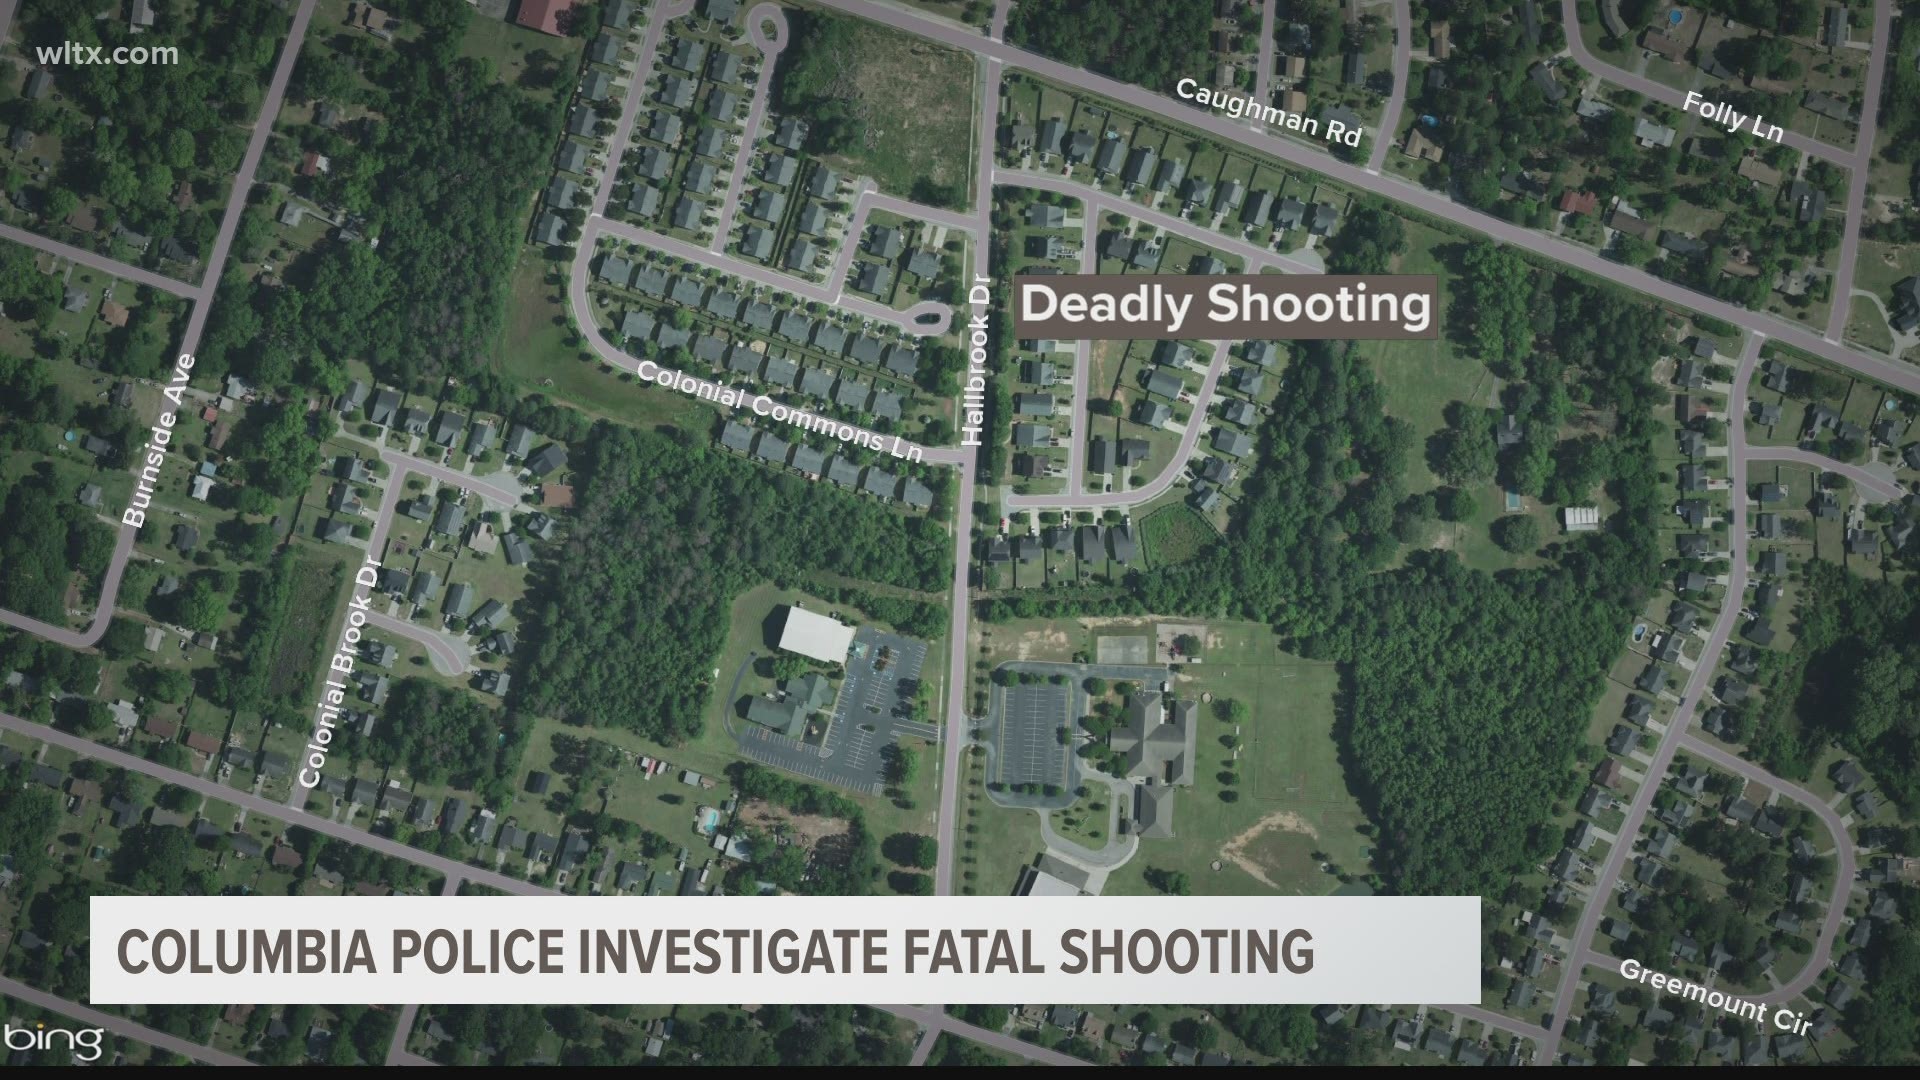 Columbia Police are investigating after a person was found shot dead early Monday morning.